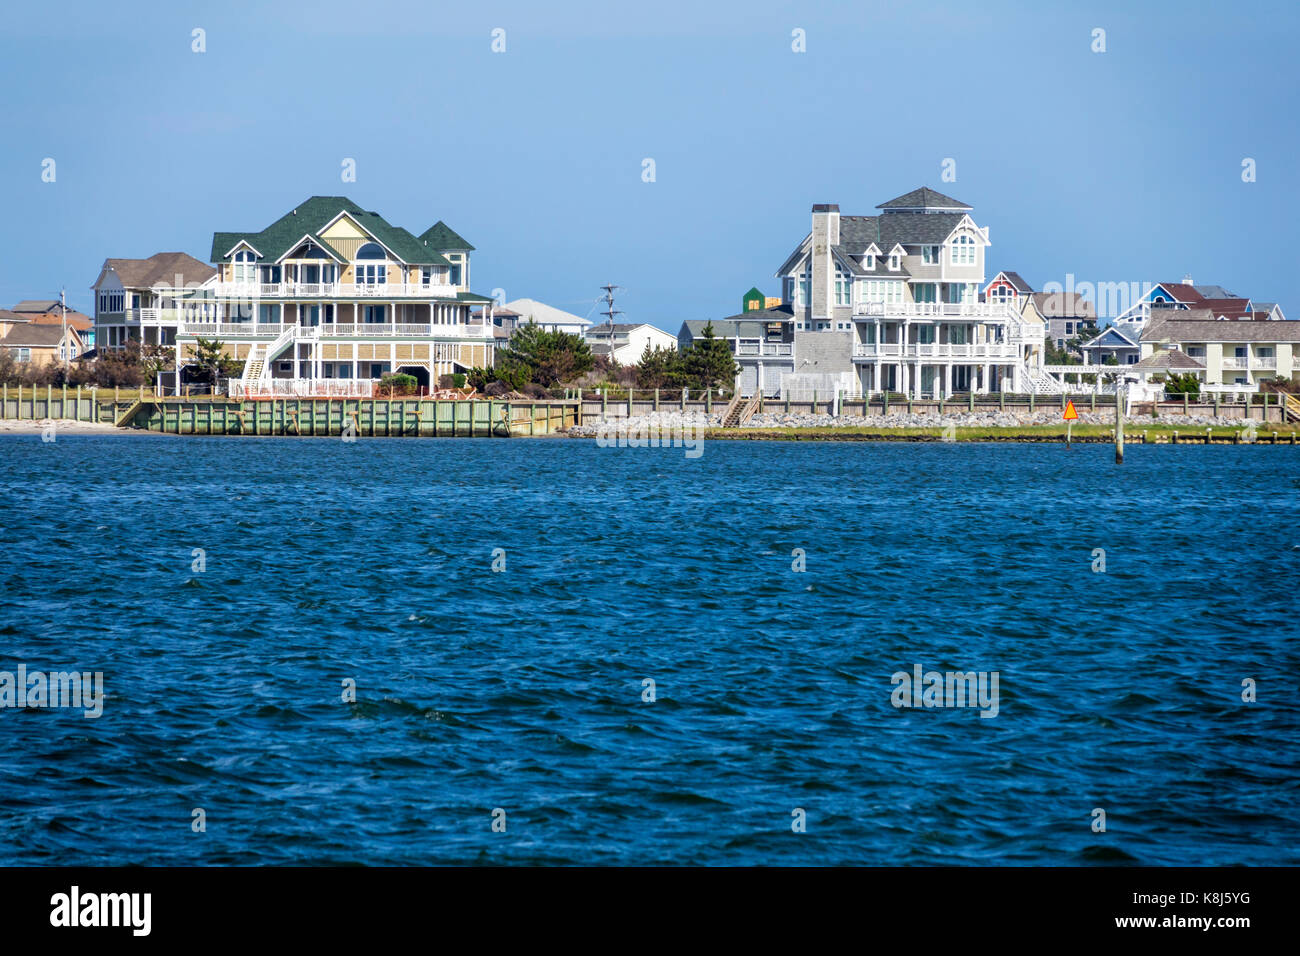 North Carolina,NC,Outer Banks,Pamlico Sound,Hatteras Island,waterfront,mansions,houses,NC170518144 Stock Photo